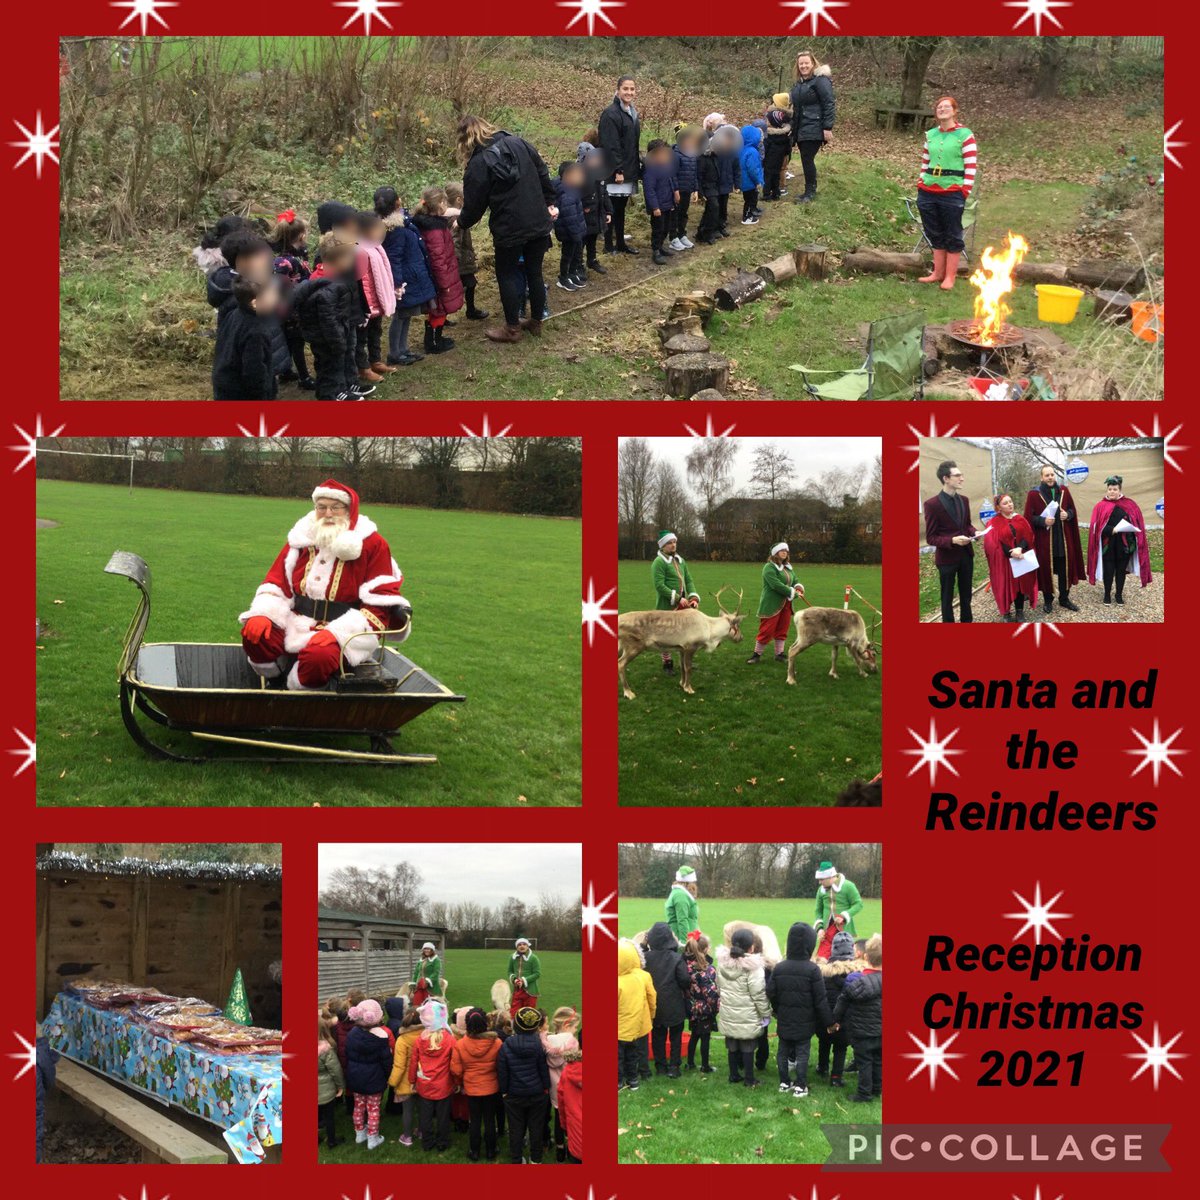 Such a lovely treat today as Santa got a couple of hours off (for good behaviour😉) to come and see us all here at JC. Massive thank you from all the children #santa #reindeer #makingmemories #lifeinreception #theJCway